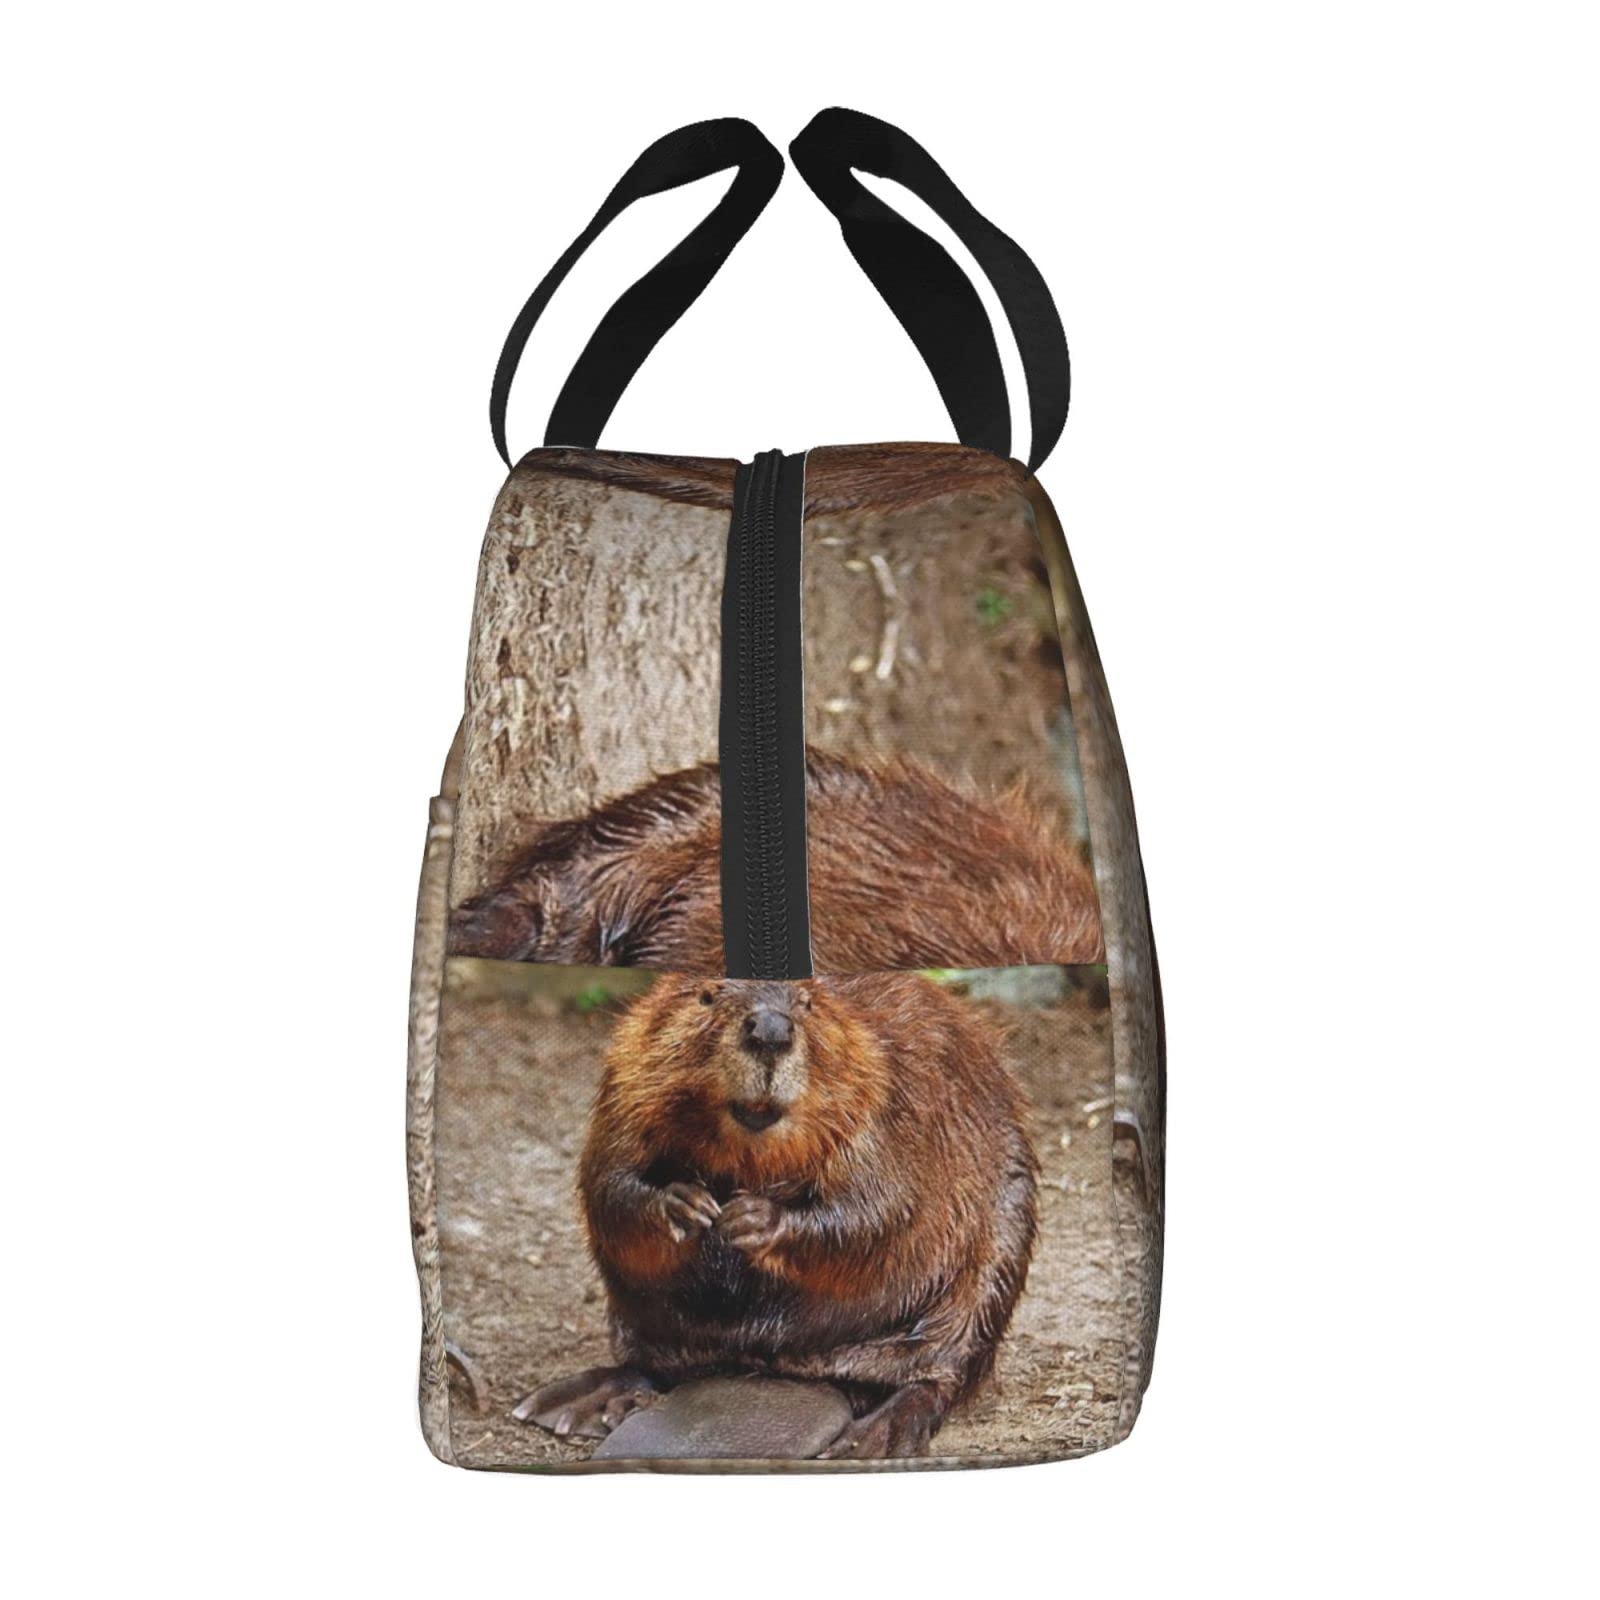 Larklitz Cute Funny Beaver Reusable Insulated Lunch Bag, 8.5in x 8in x 5in, Polyester, For Women Men